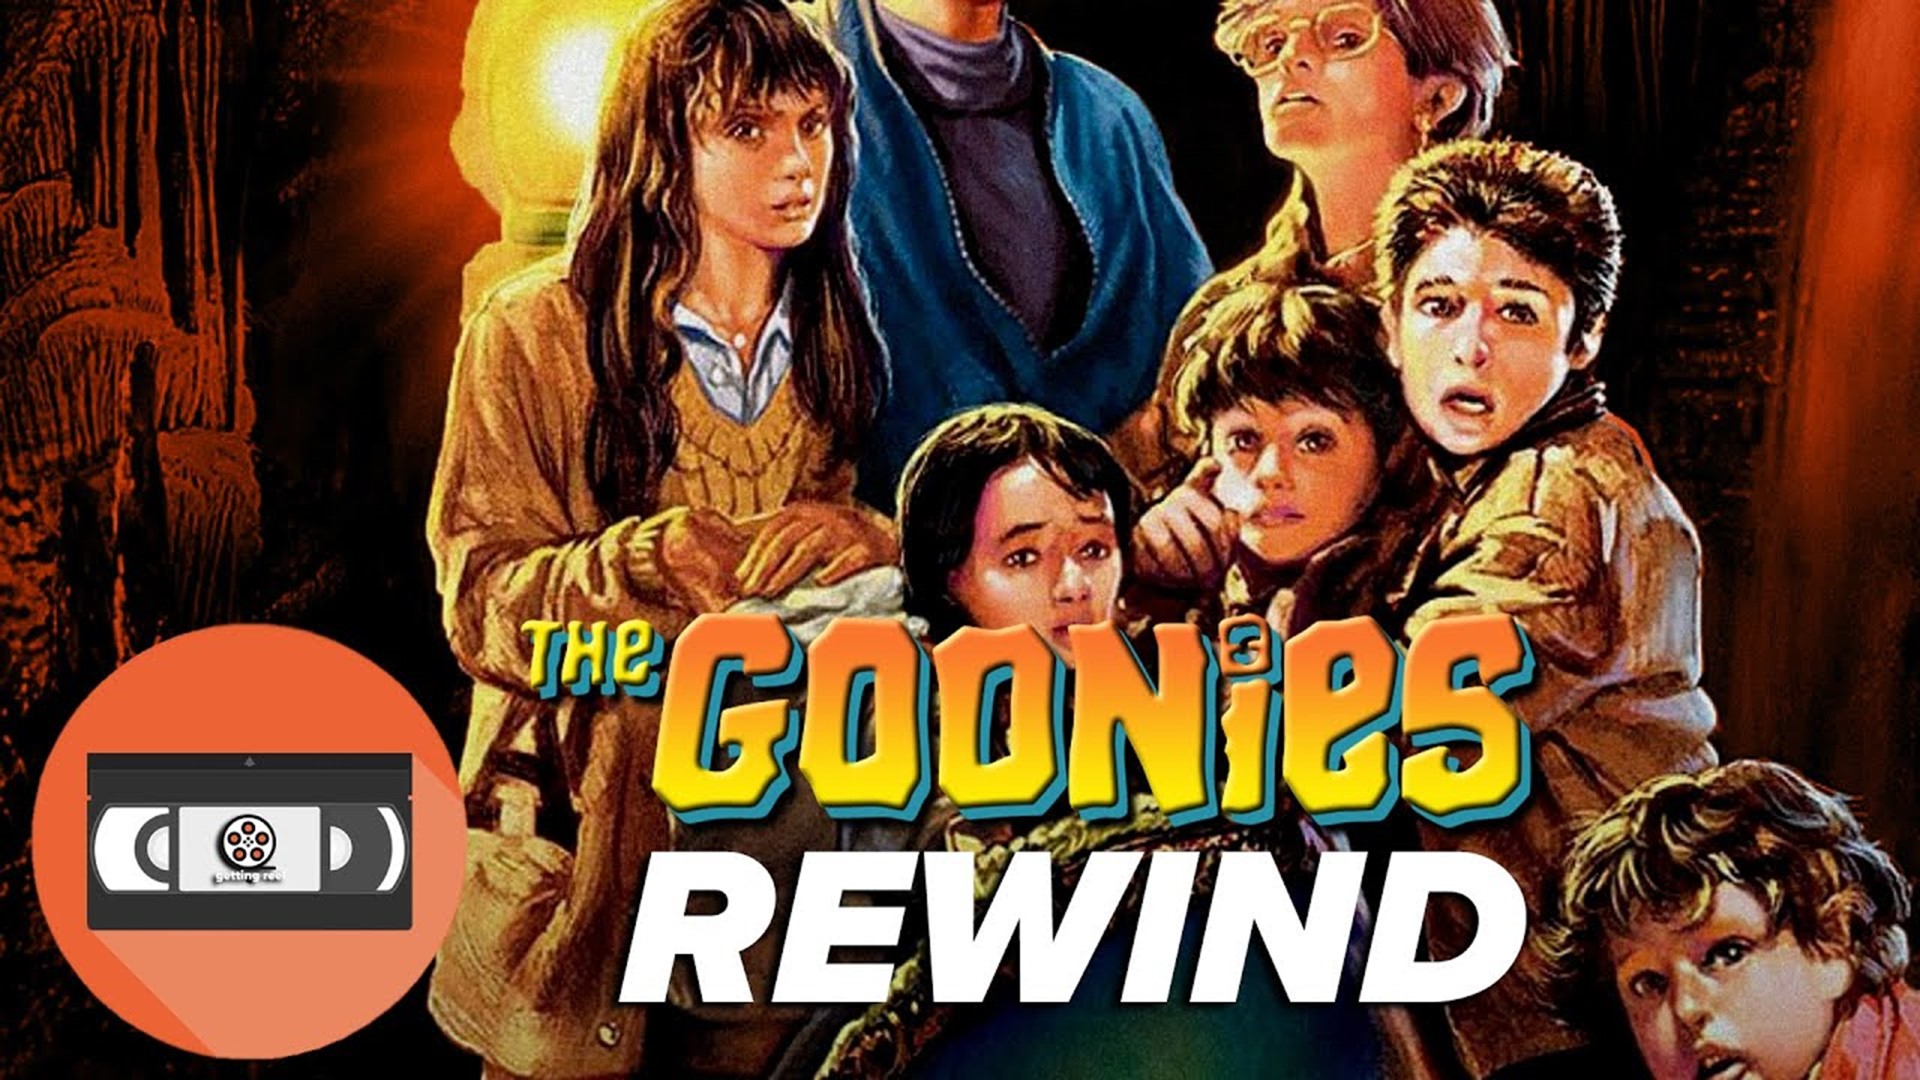 Even three decades later, The Goonies remains a iconic piece of 80s nostalgia because it transcends its own genre and feels like a perfect slice of being a kid.